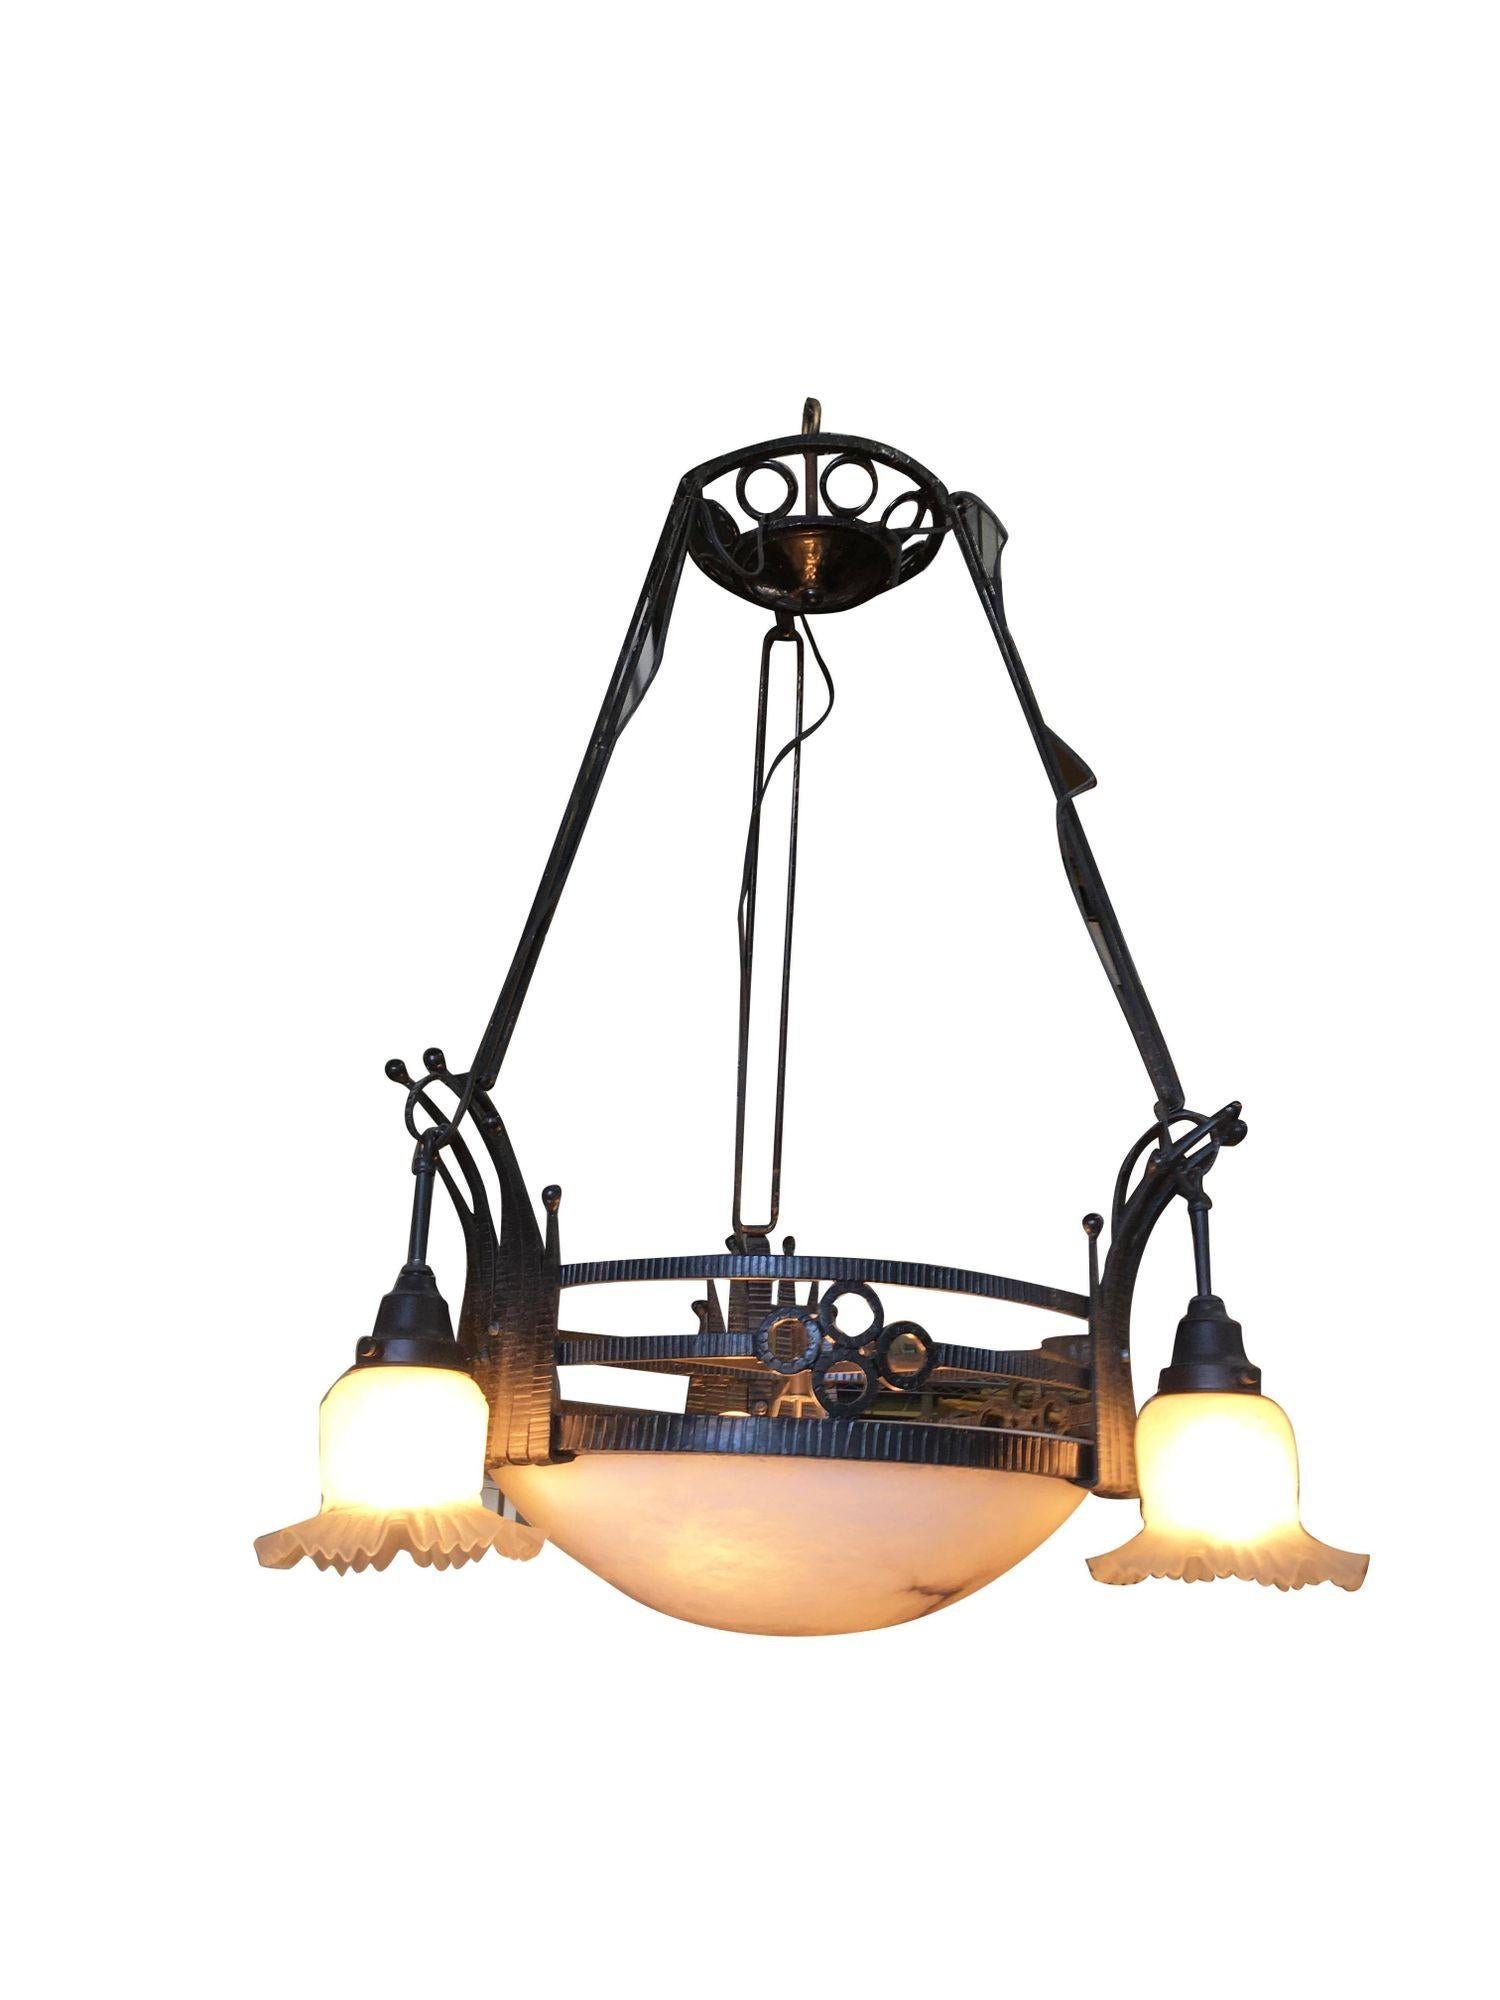 Black Iron Tole 6-Light Chandelier with Alabaster and Acid Patina For Sale 5